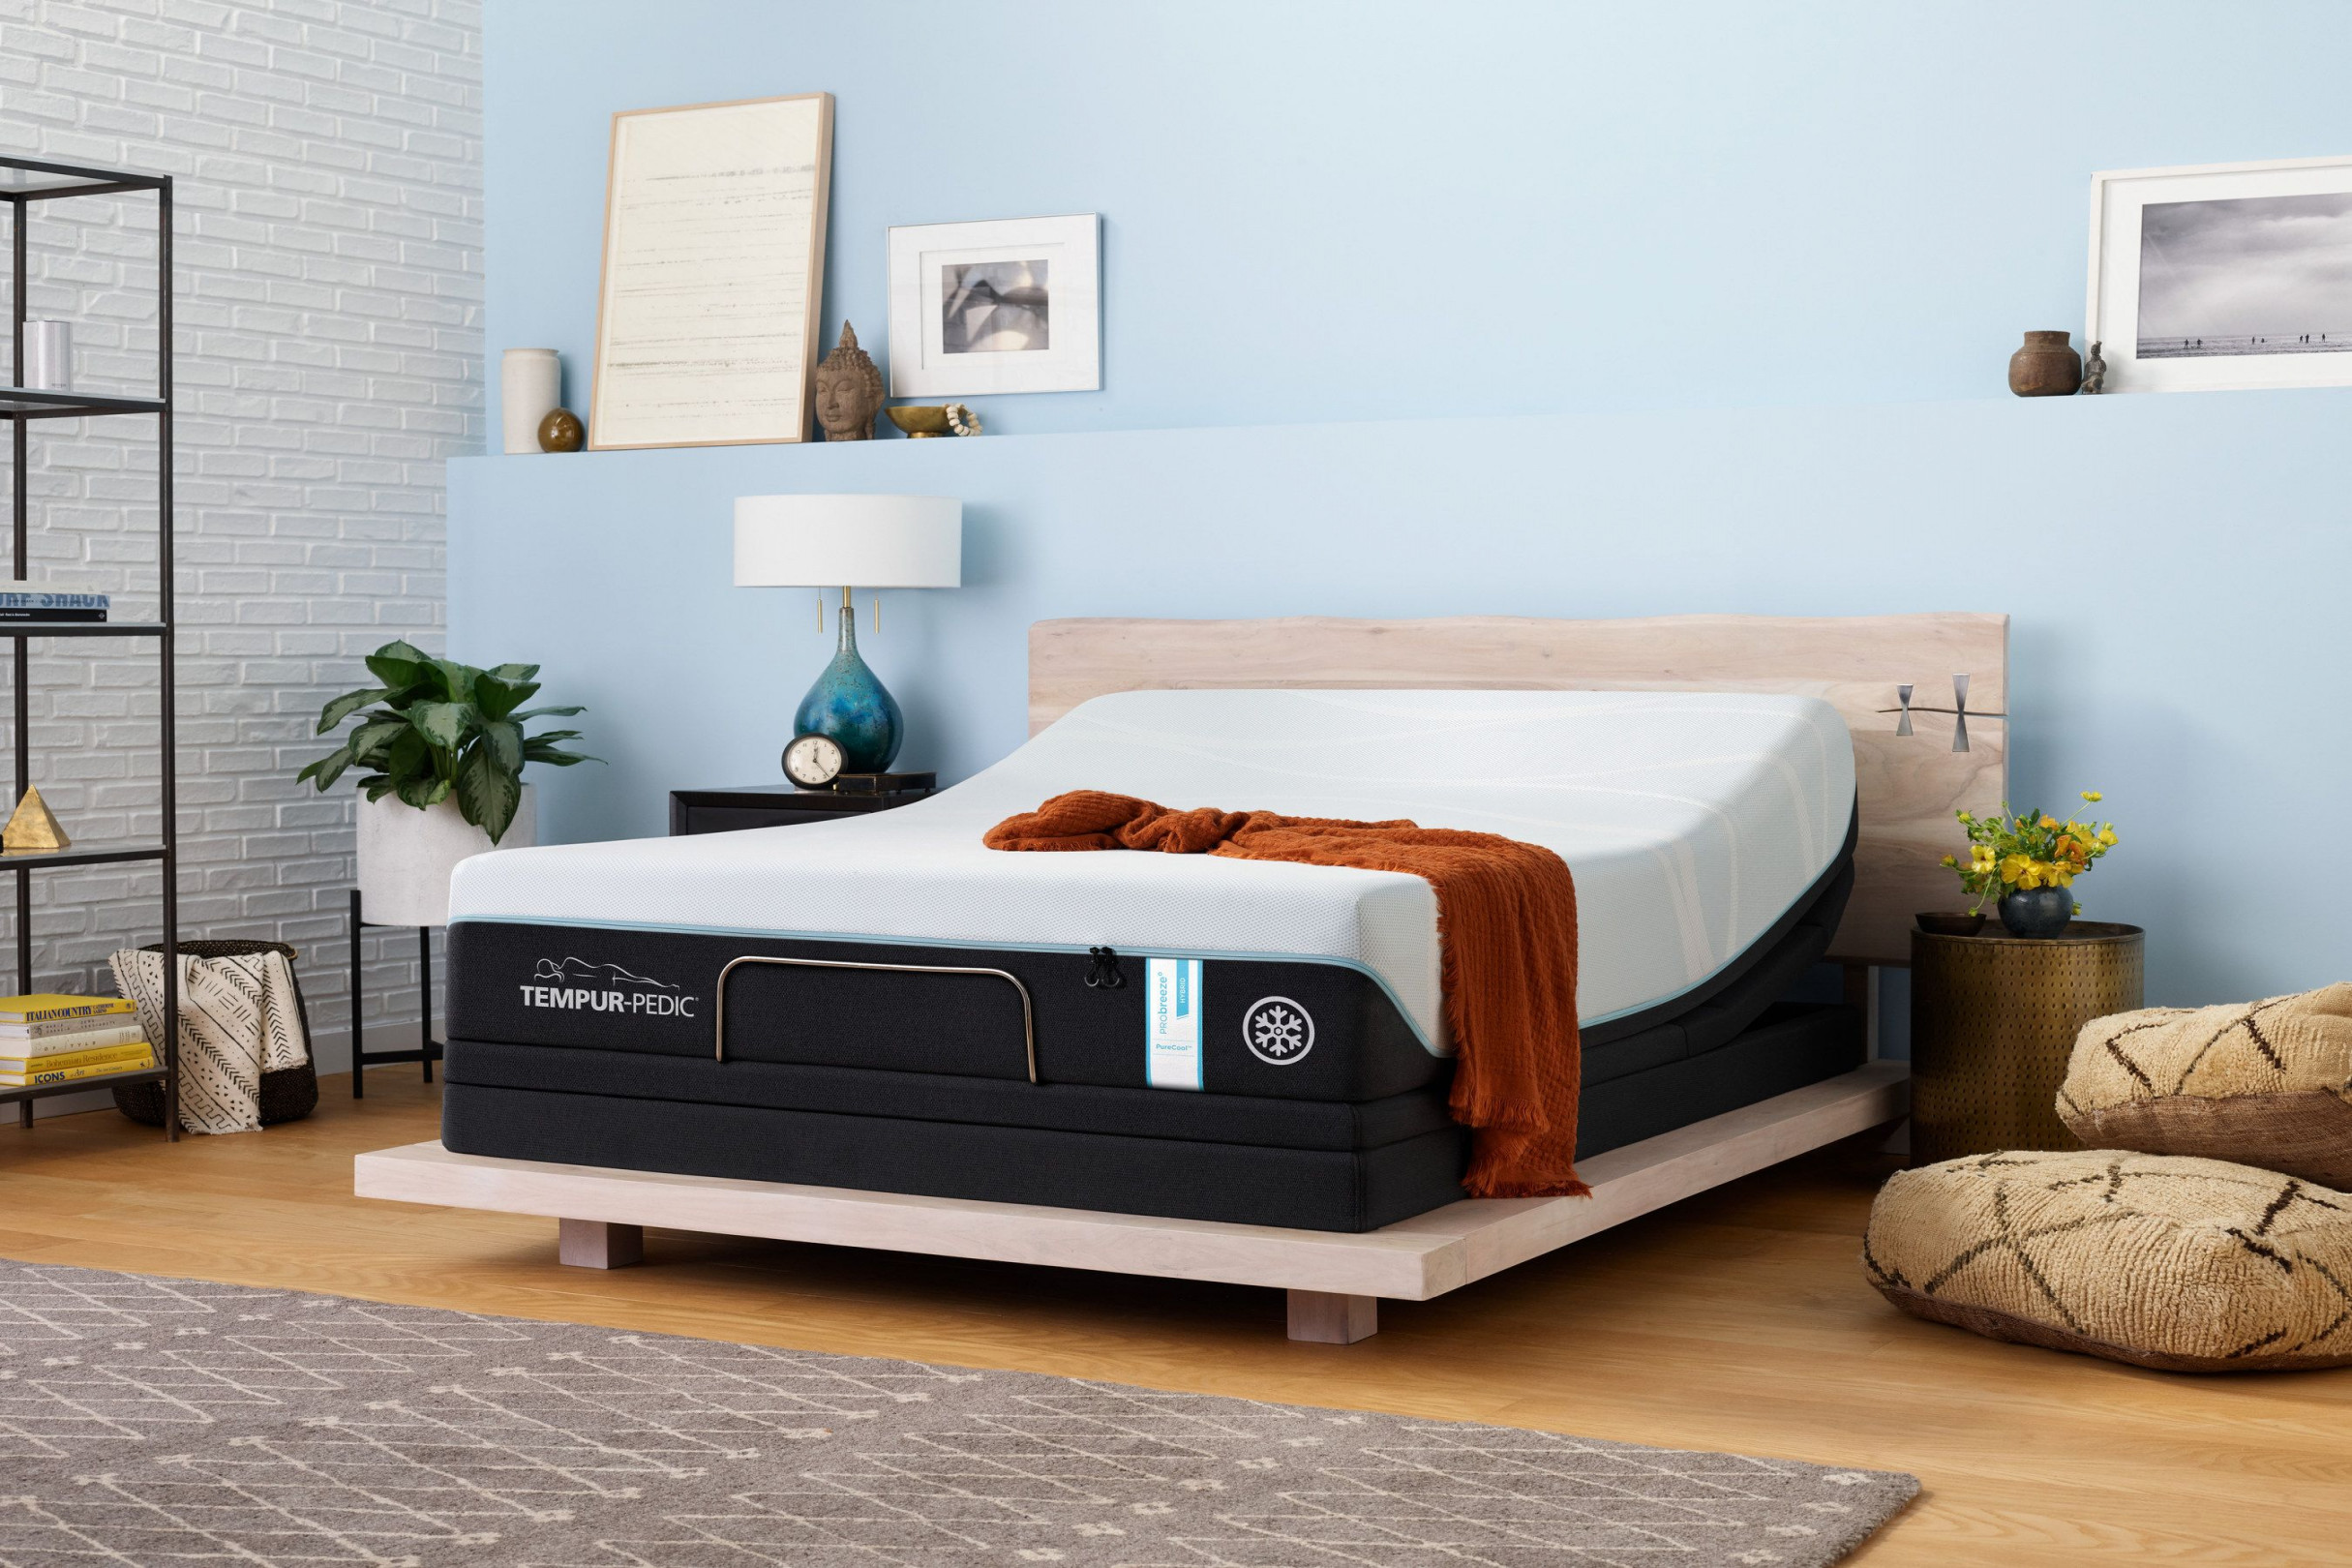 Everything You Need To Know Before Buying The Tempur-Pedic